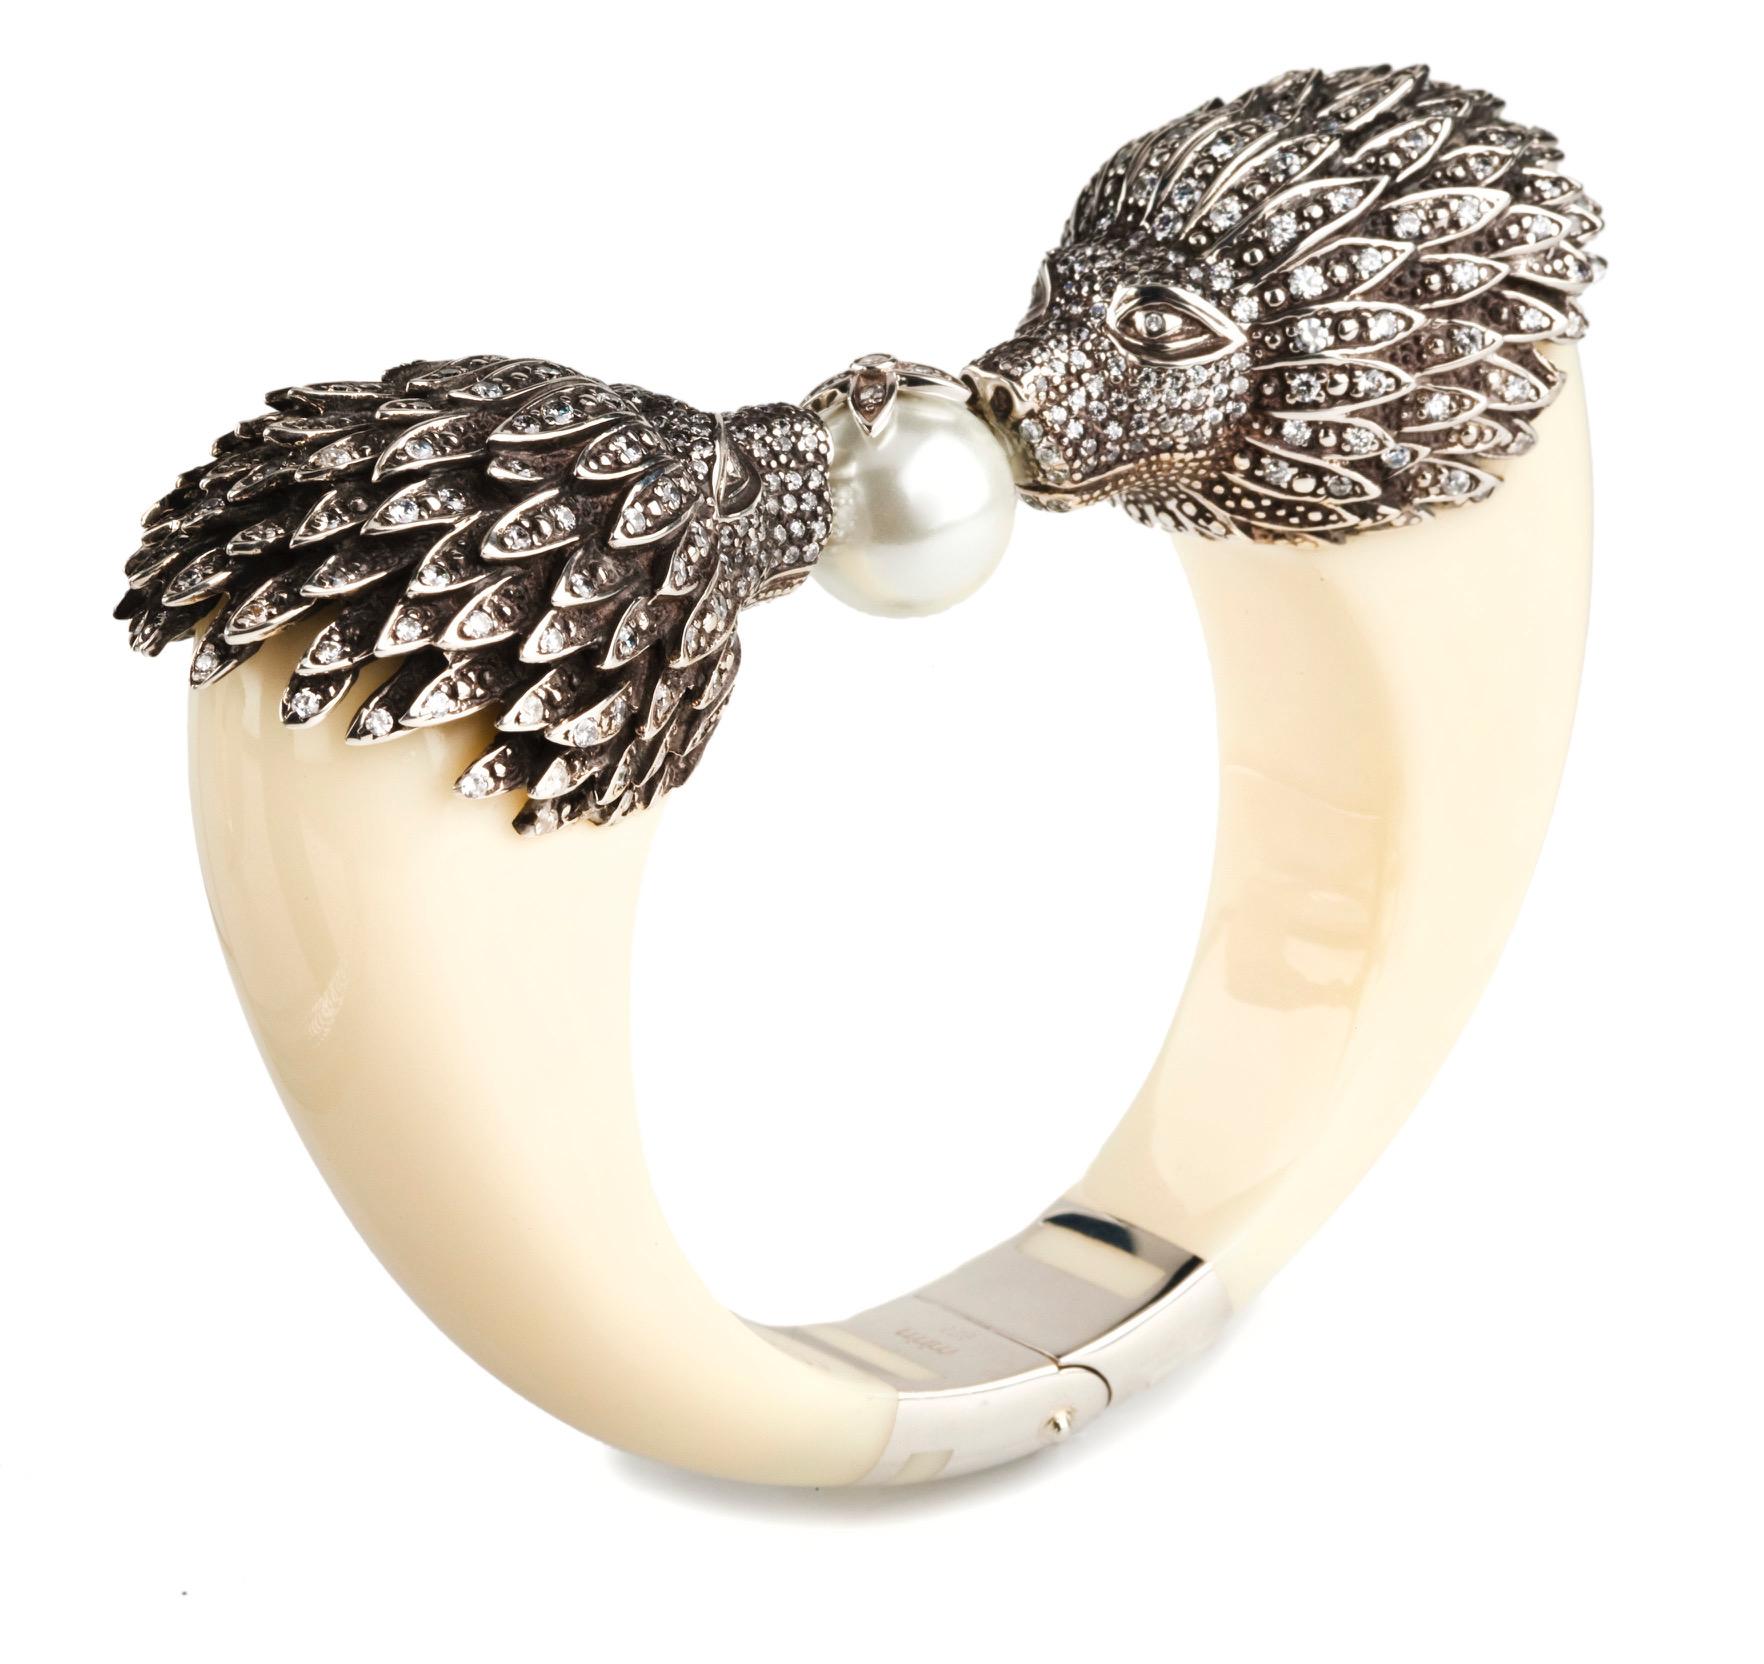 This Miriam Salat limited edition lion head bangle features cream and ivory color resin with vintage sterling silver. 
Cubic zircon full diamond facet rounds, prong set.
This cuff is set to feel and look like fine jewelry. 
Bangle is flexible to fit